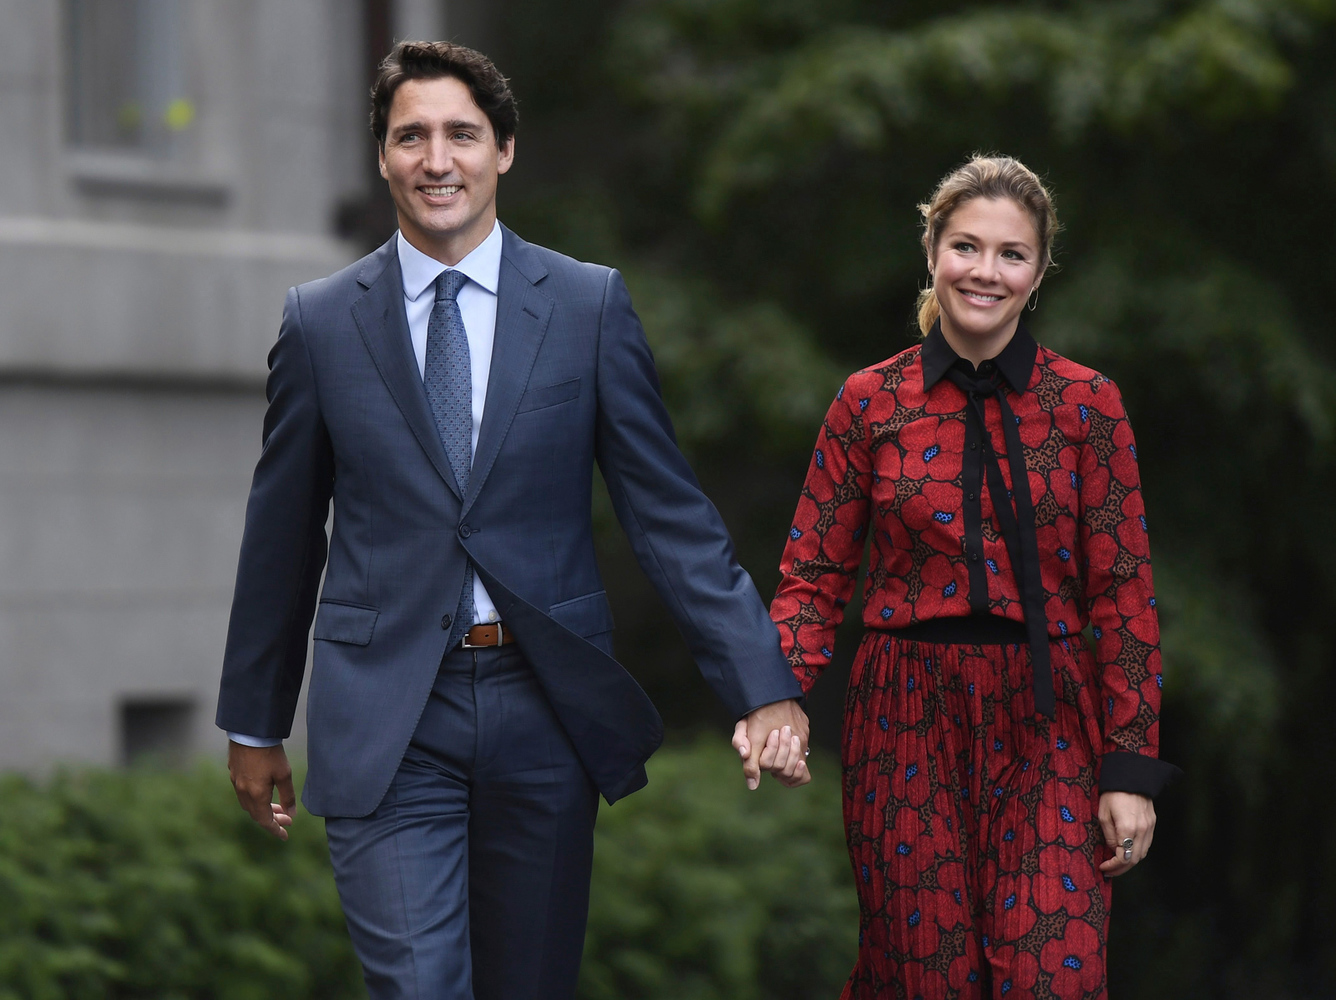 Justin Trudeau divorced after 18 years of marriage: photo of the Prime Minister of Canada with his model wife